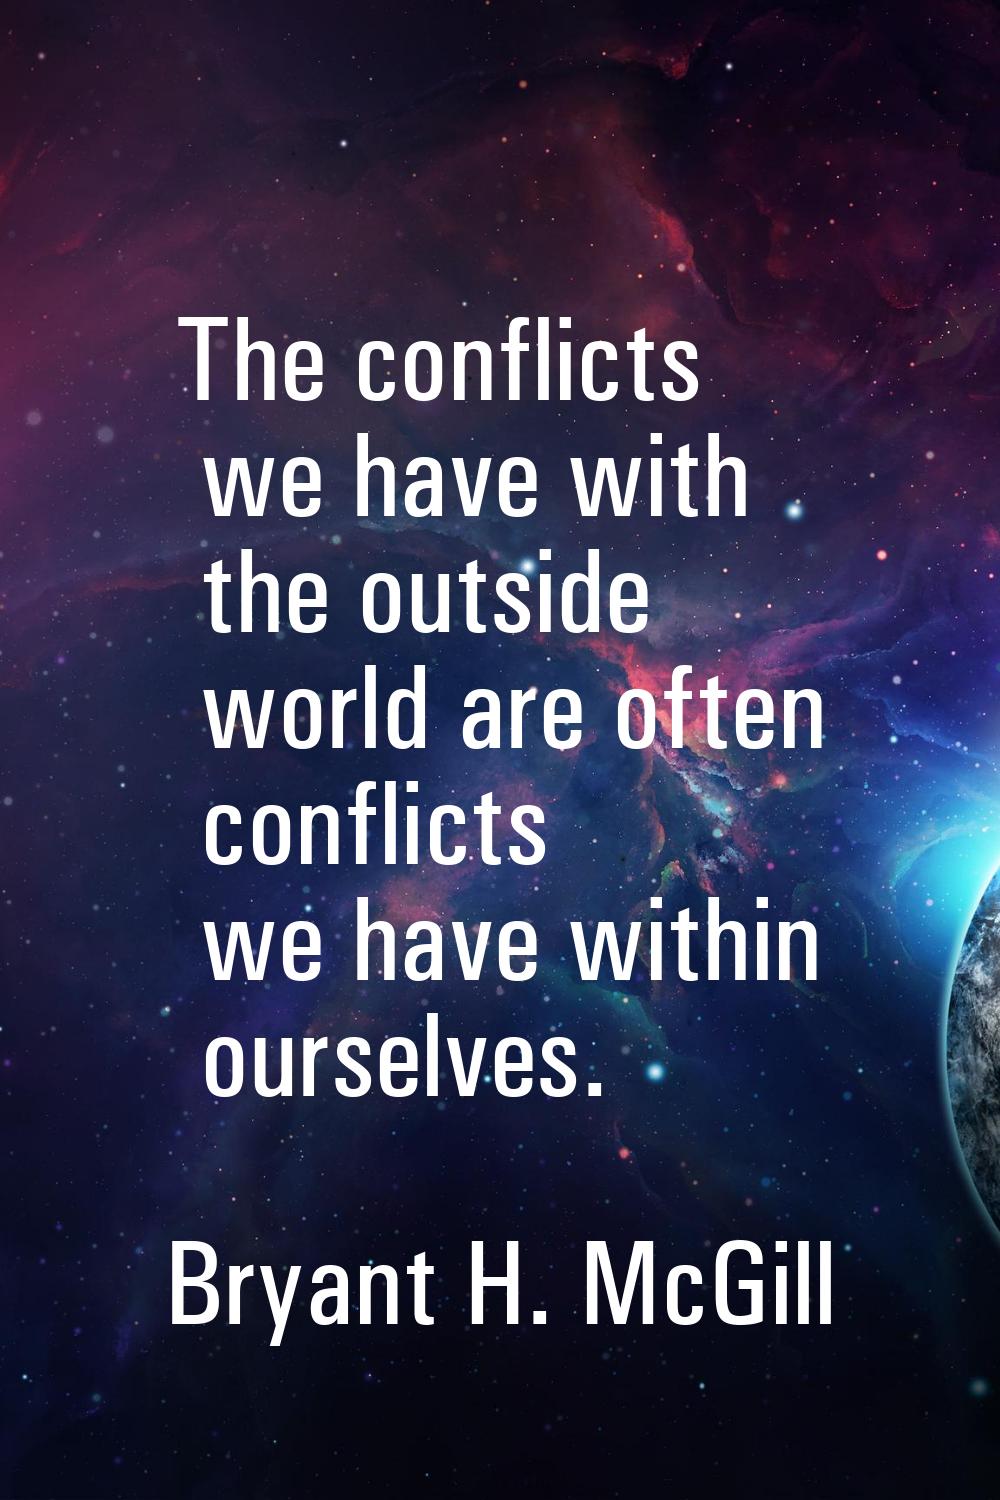 The conflicts we have with the outside world are often conflicts we have within ourselves.